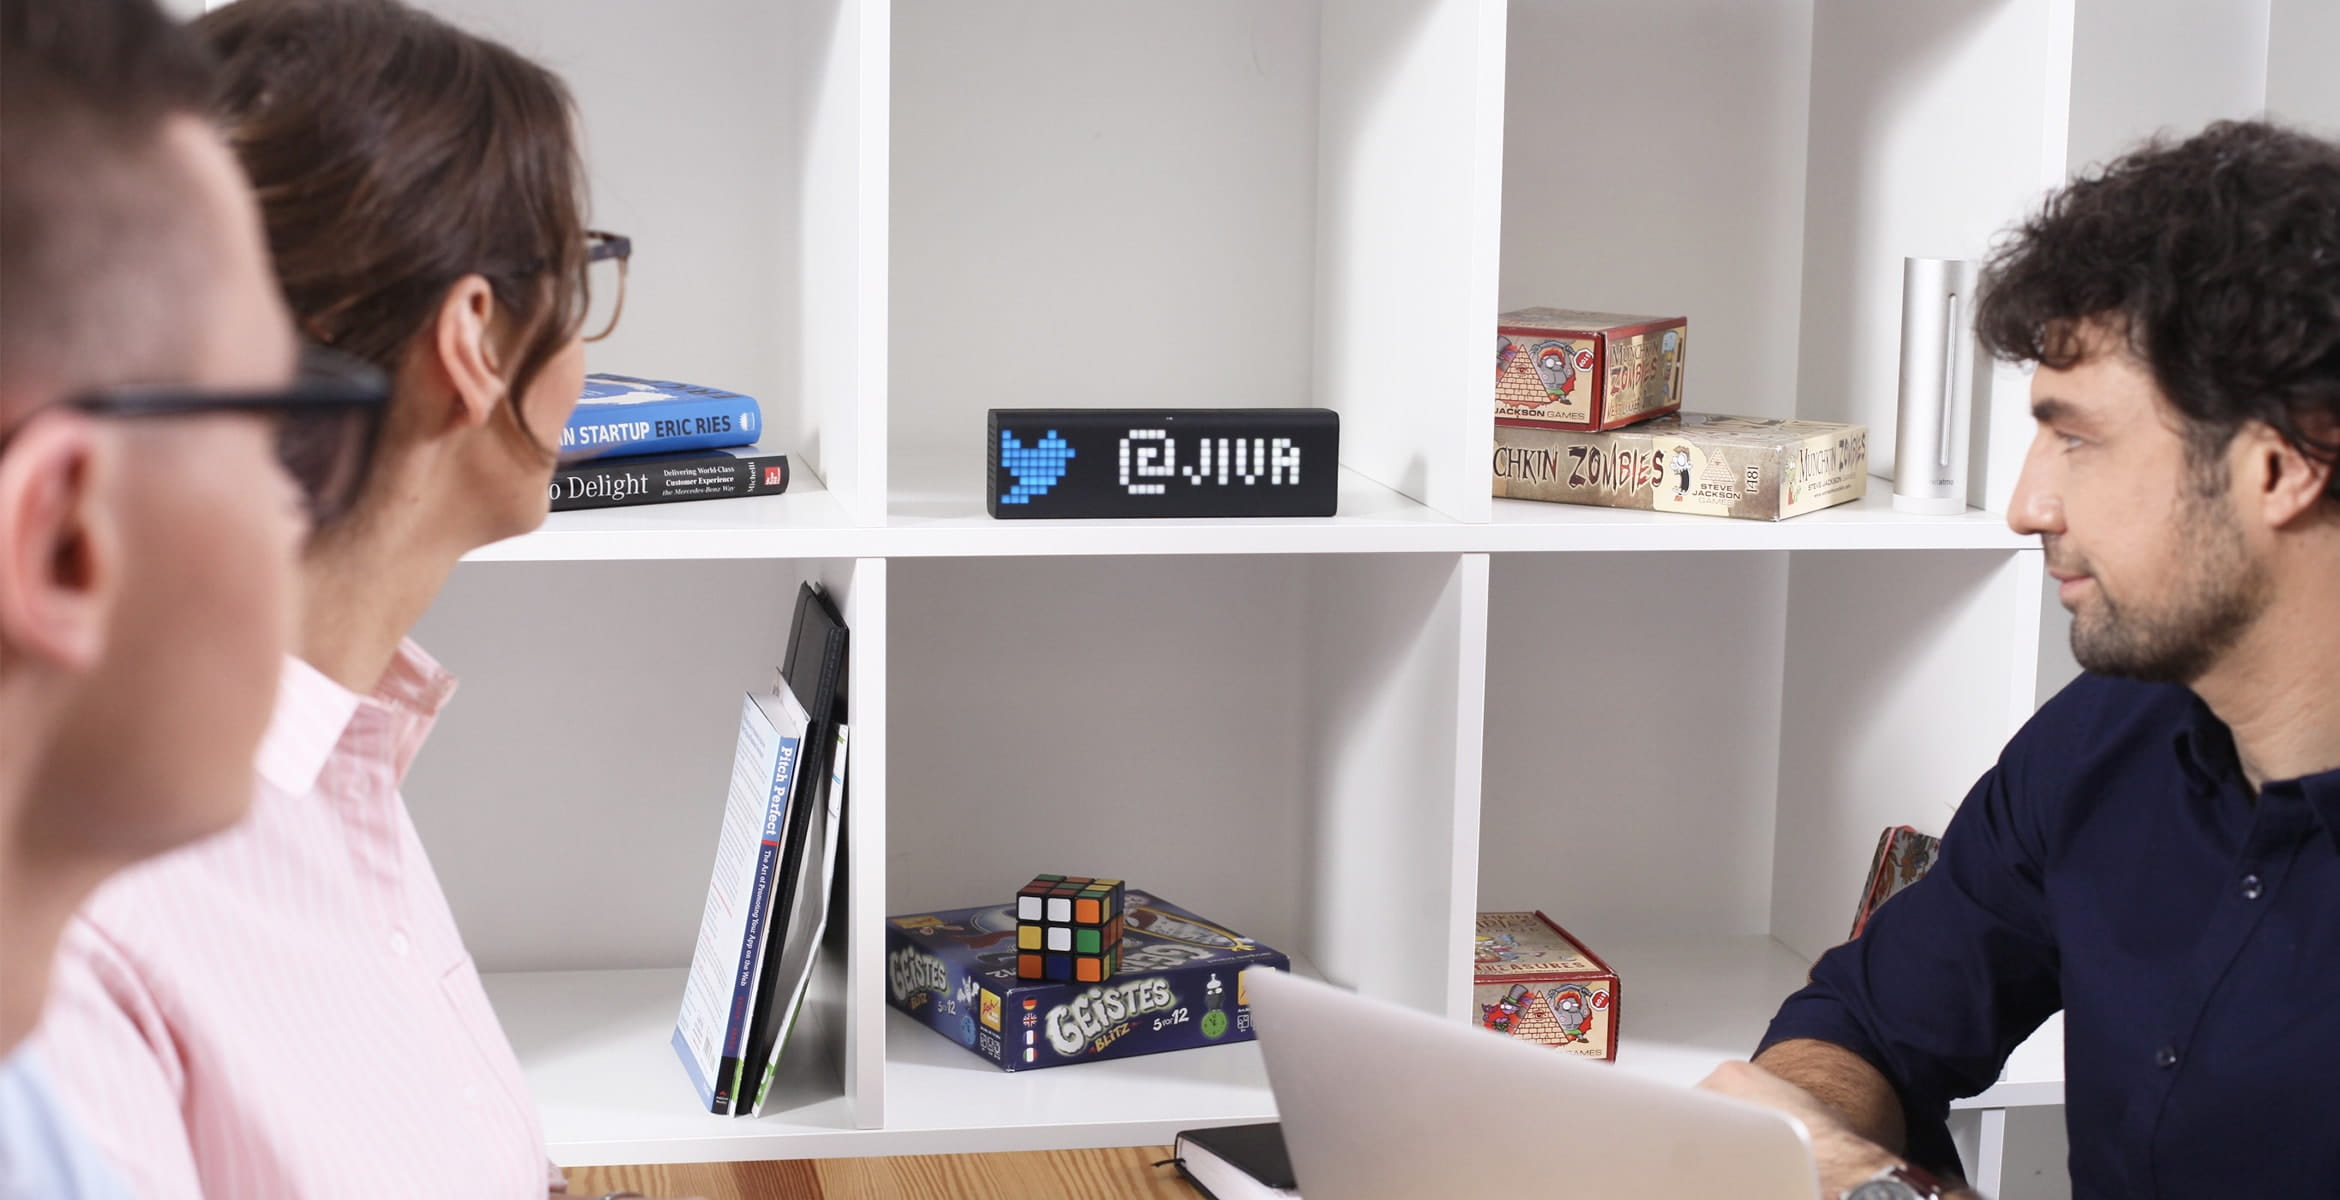 LaMetric Time smart clock, placed in a shelf, displaying people brand mention in Twitter